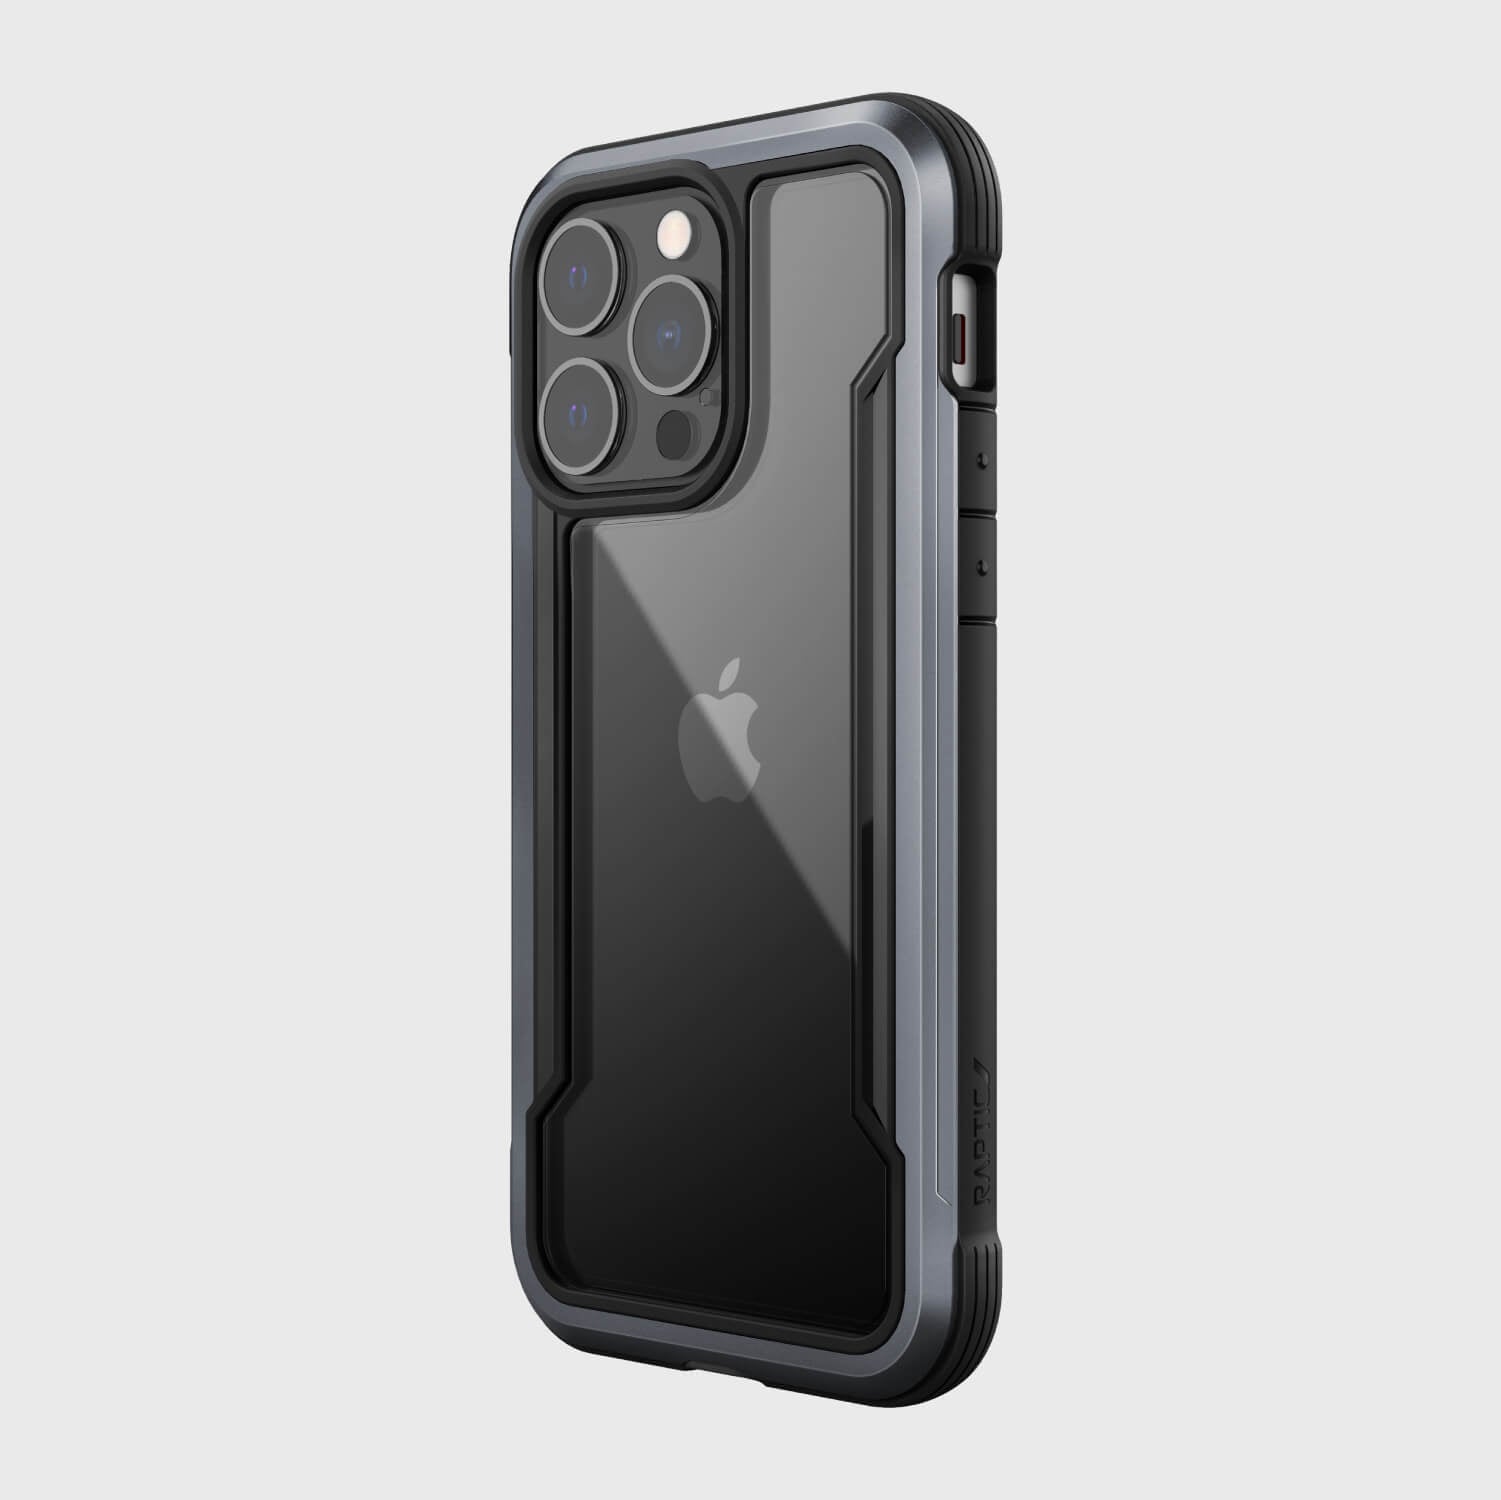 The SHIELD PRO iPhone 13 Pro case, provided by Raptic Shield Pro, provides 13-foot drop protection and is available in black.